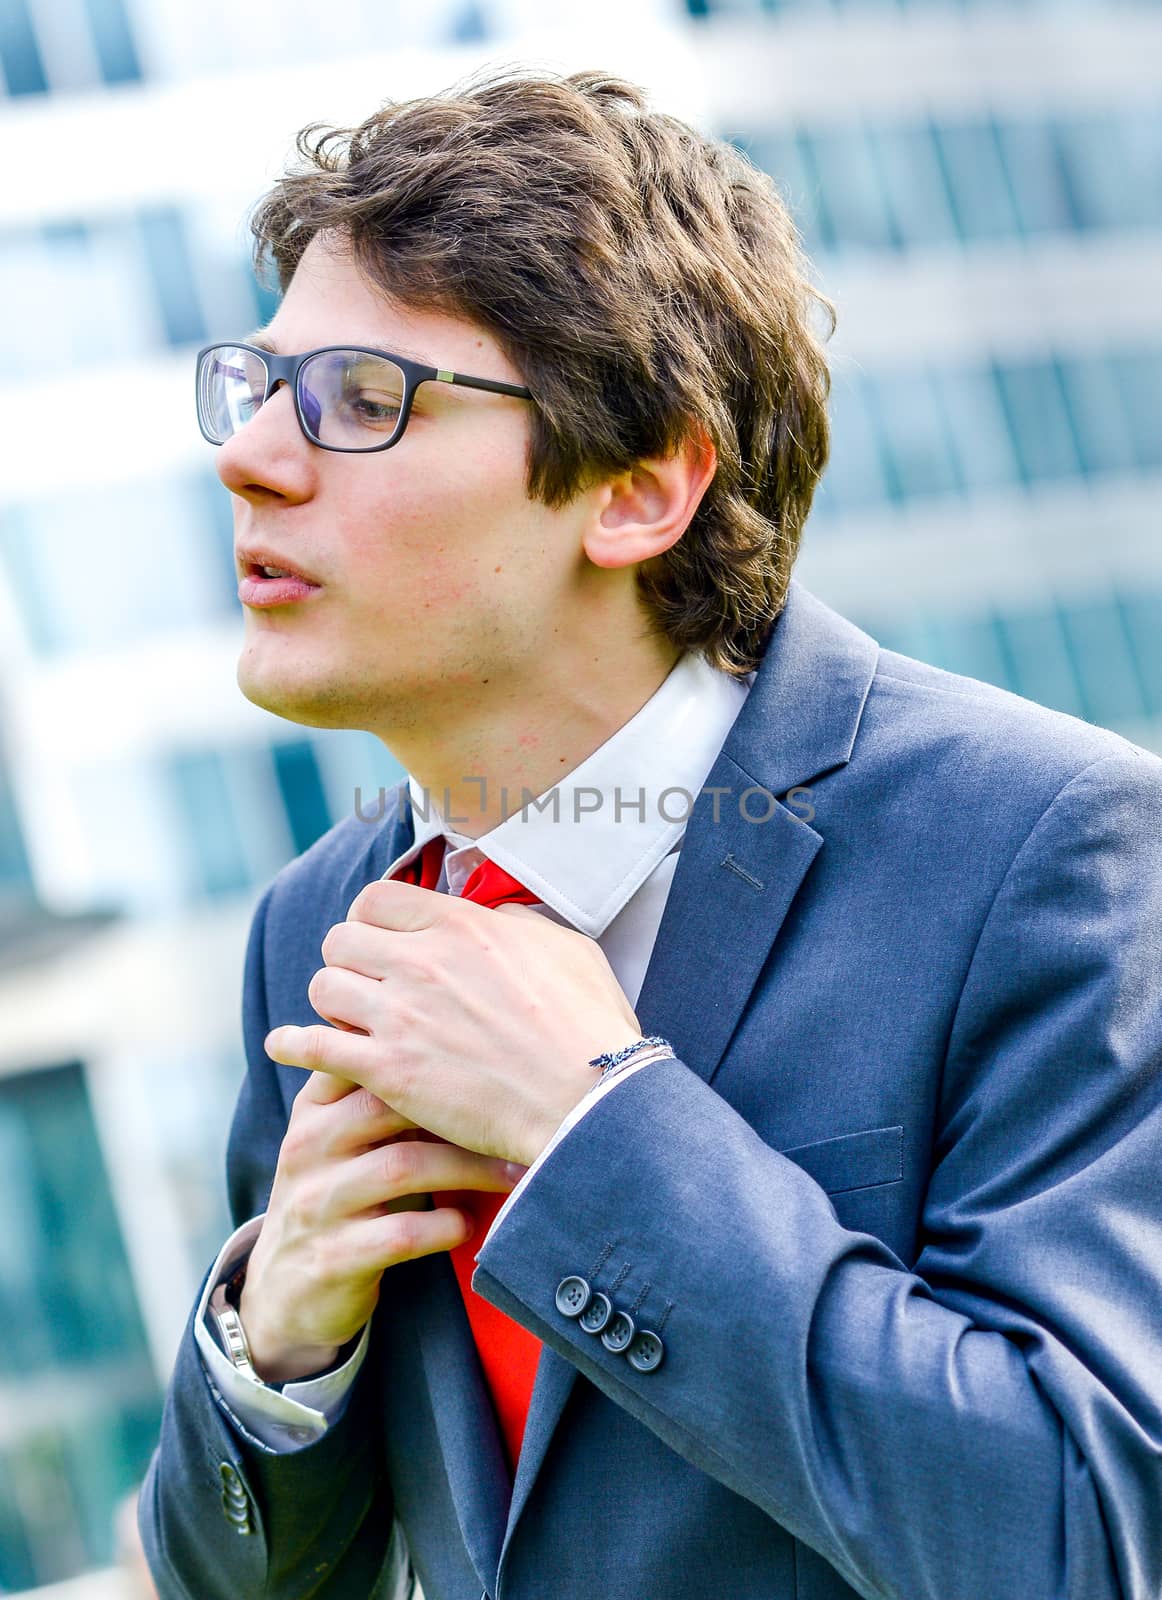 dynamic young leader adjust his tie before a job interview or business meeting